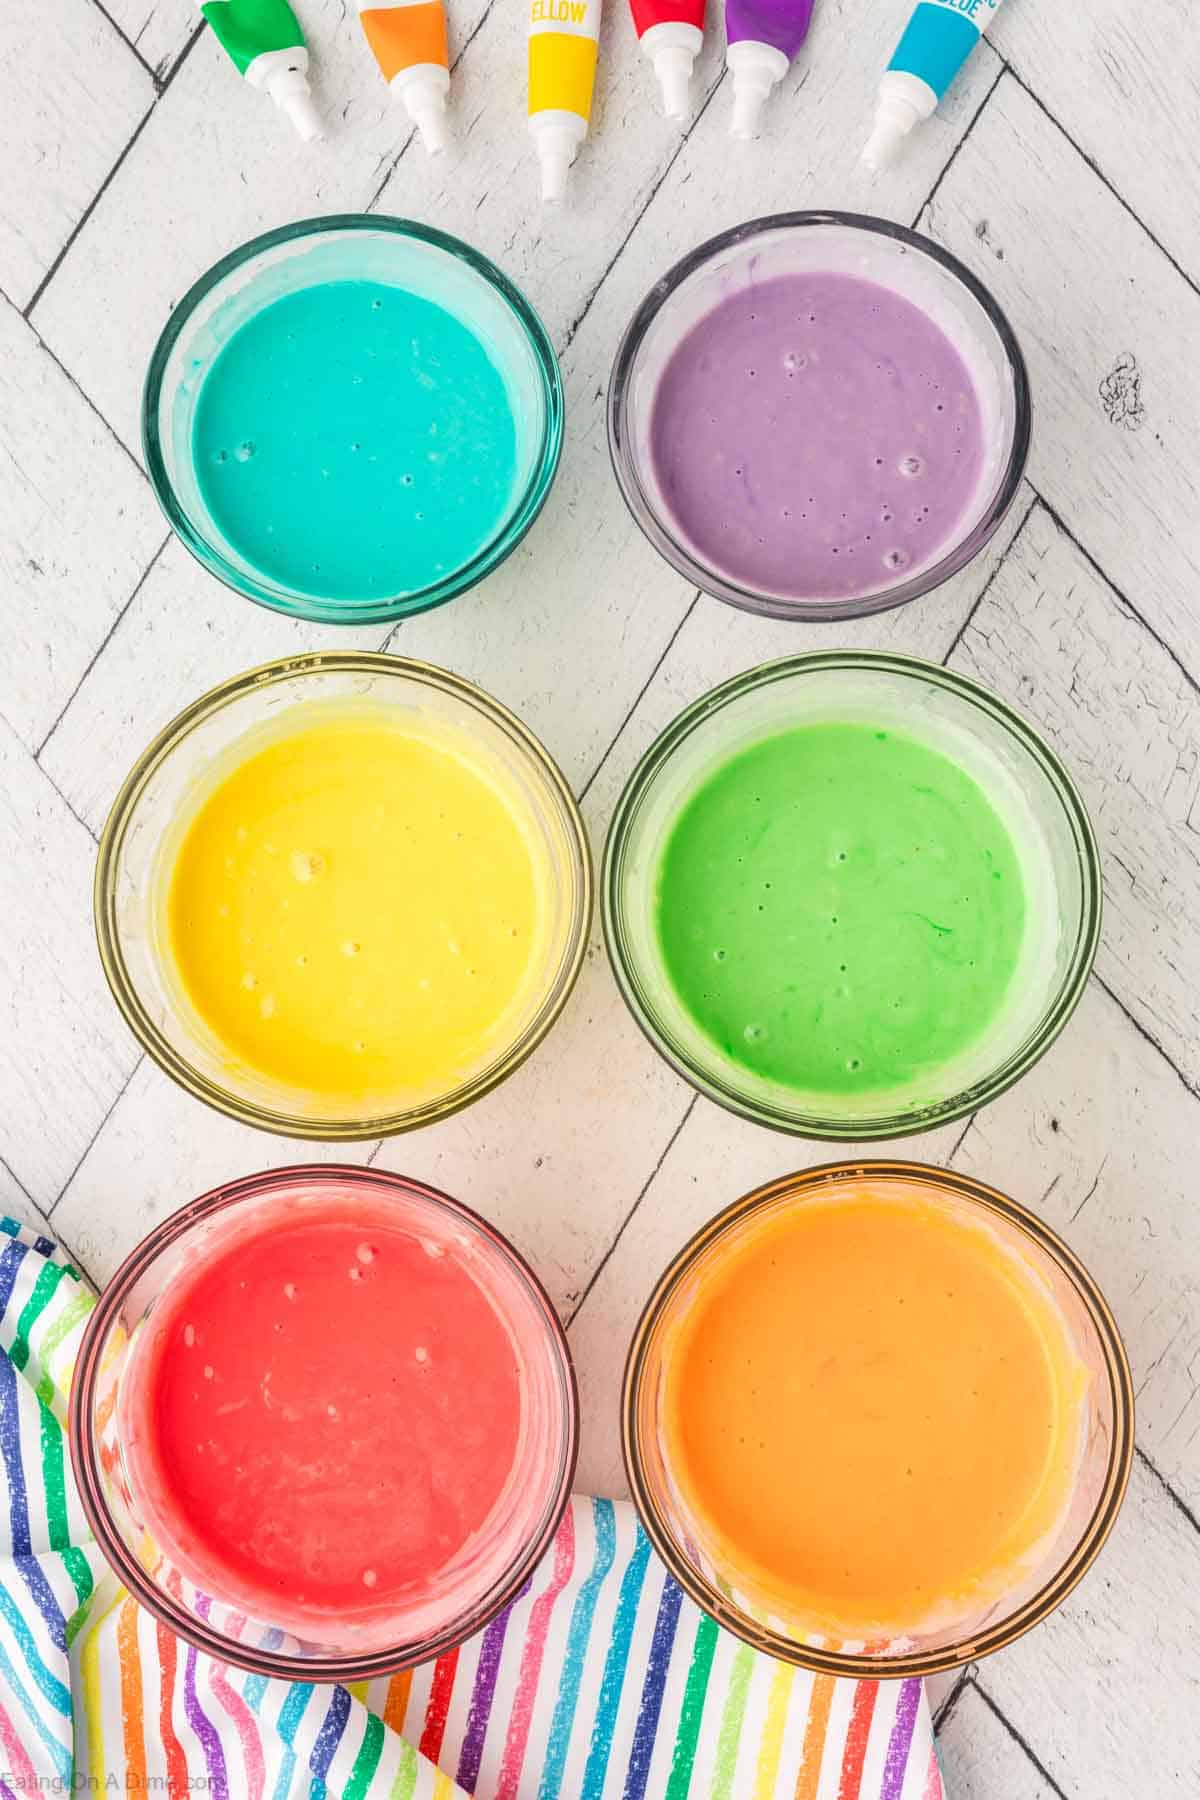 Adding food color to the pancake batter in the 6 bowls